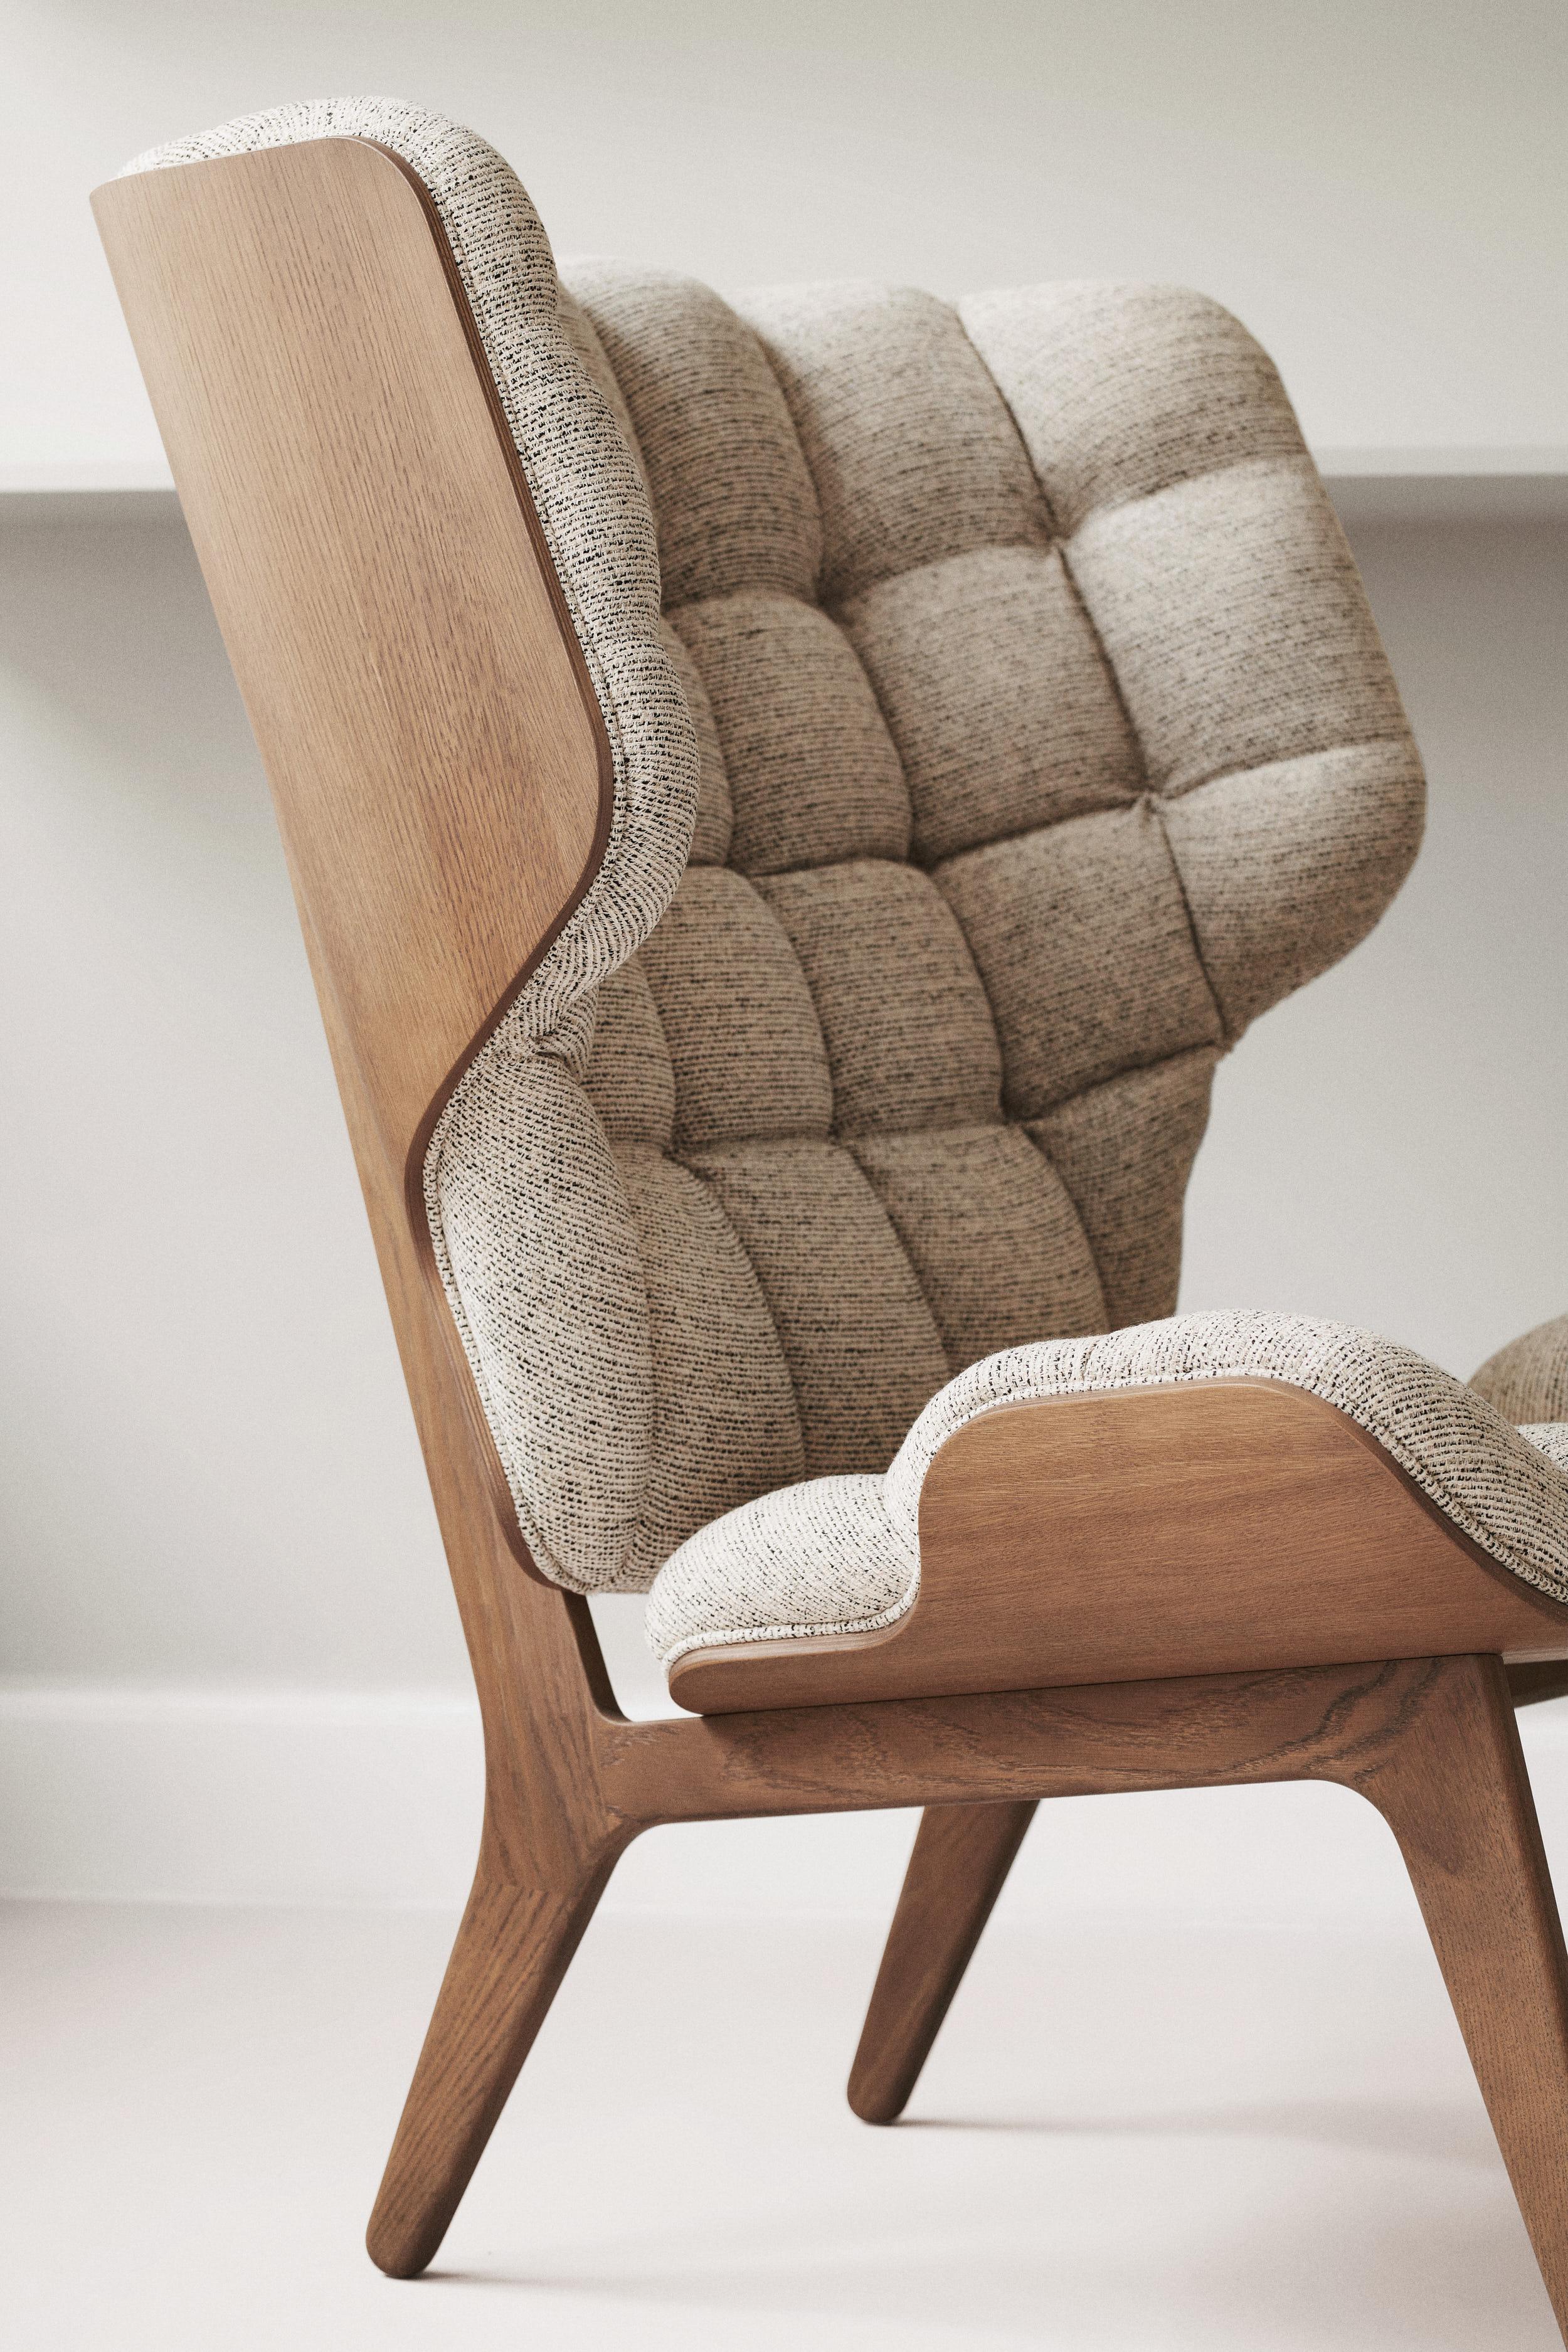 Danish Contemporary Chair 'Mammoth' by Norr11, Light Smoked Oak, Fame 61003 For Sale